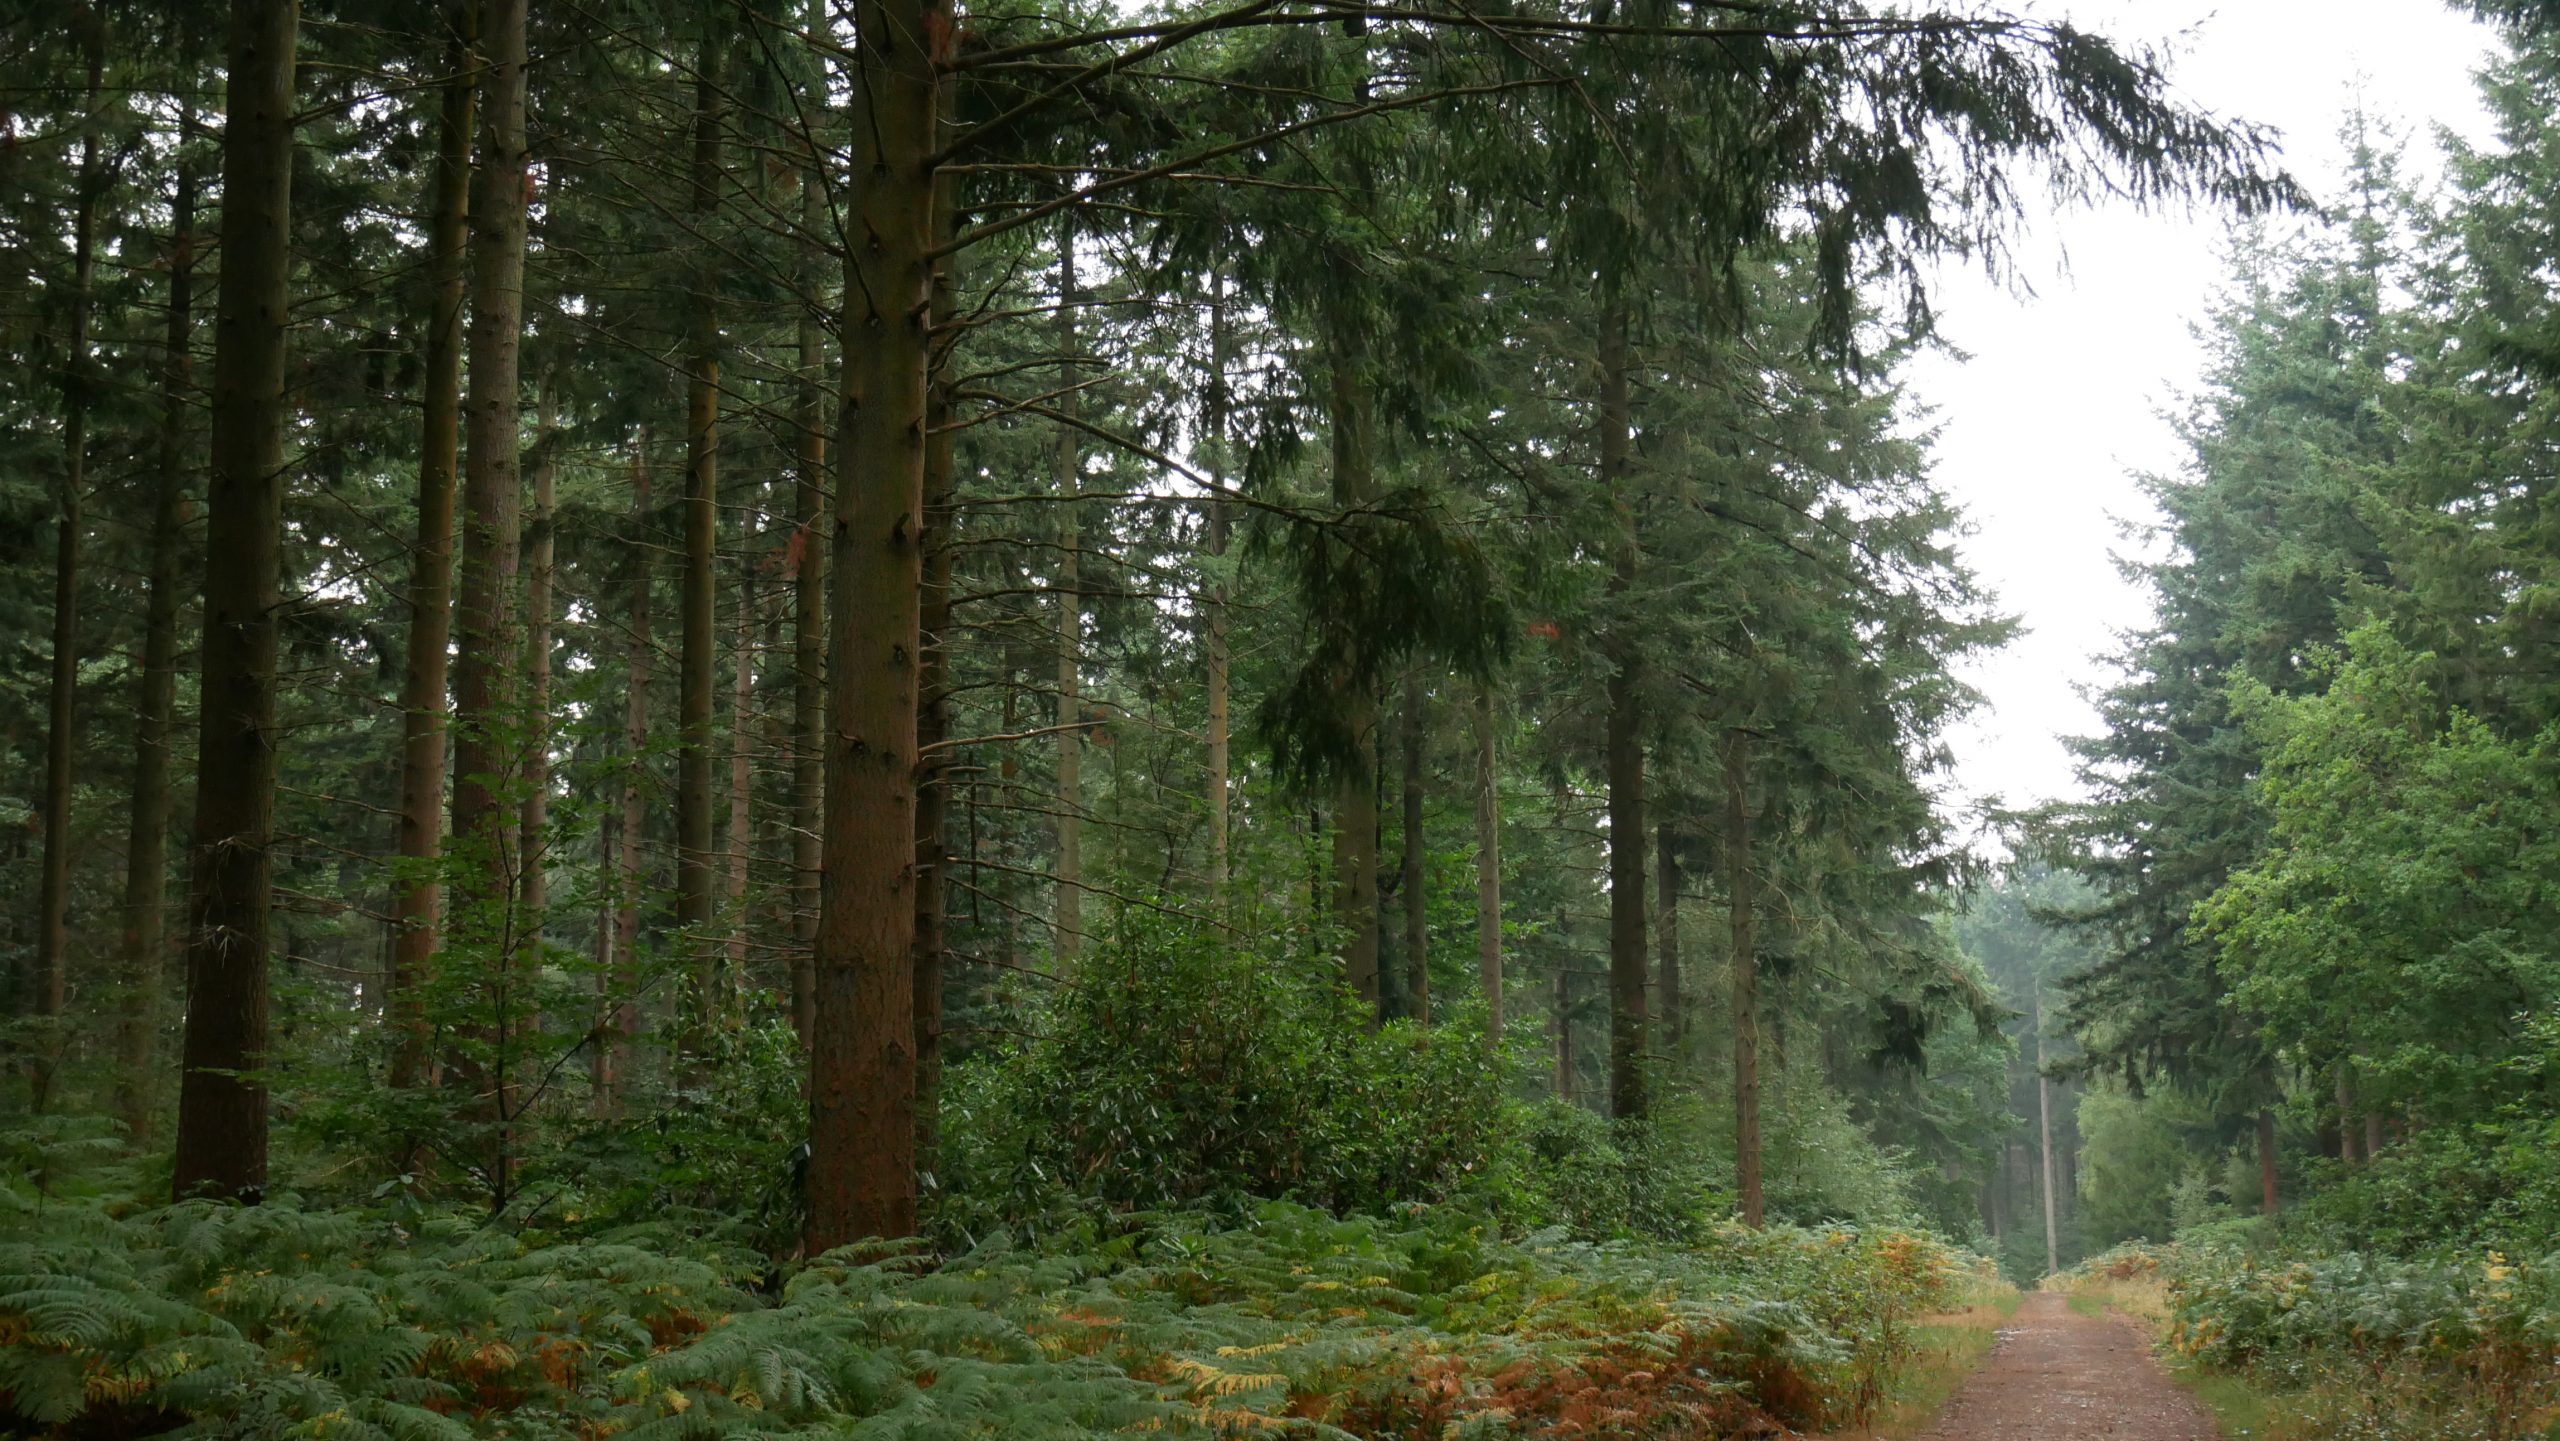 A wide track through trees in a forest in Surrey